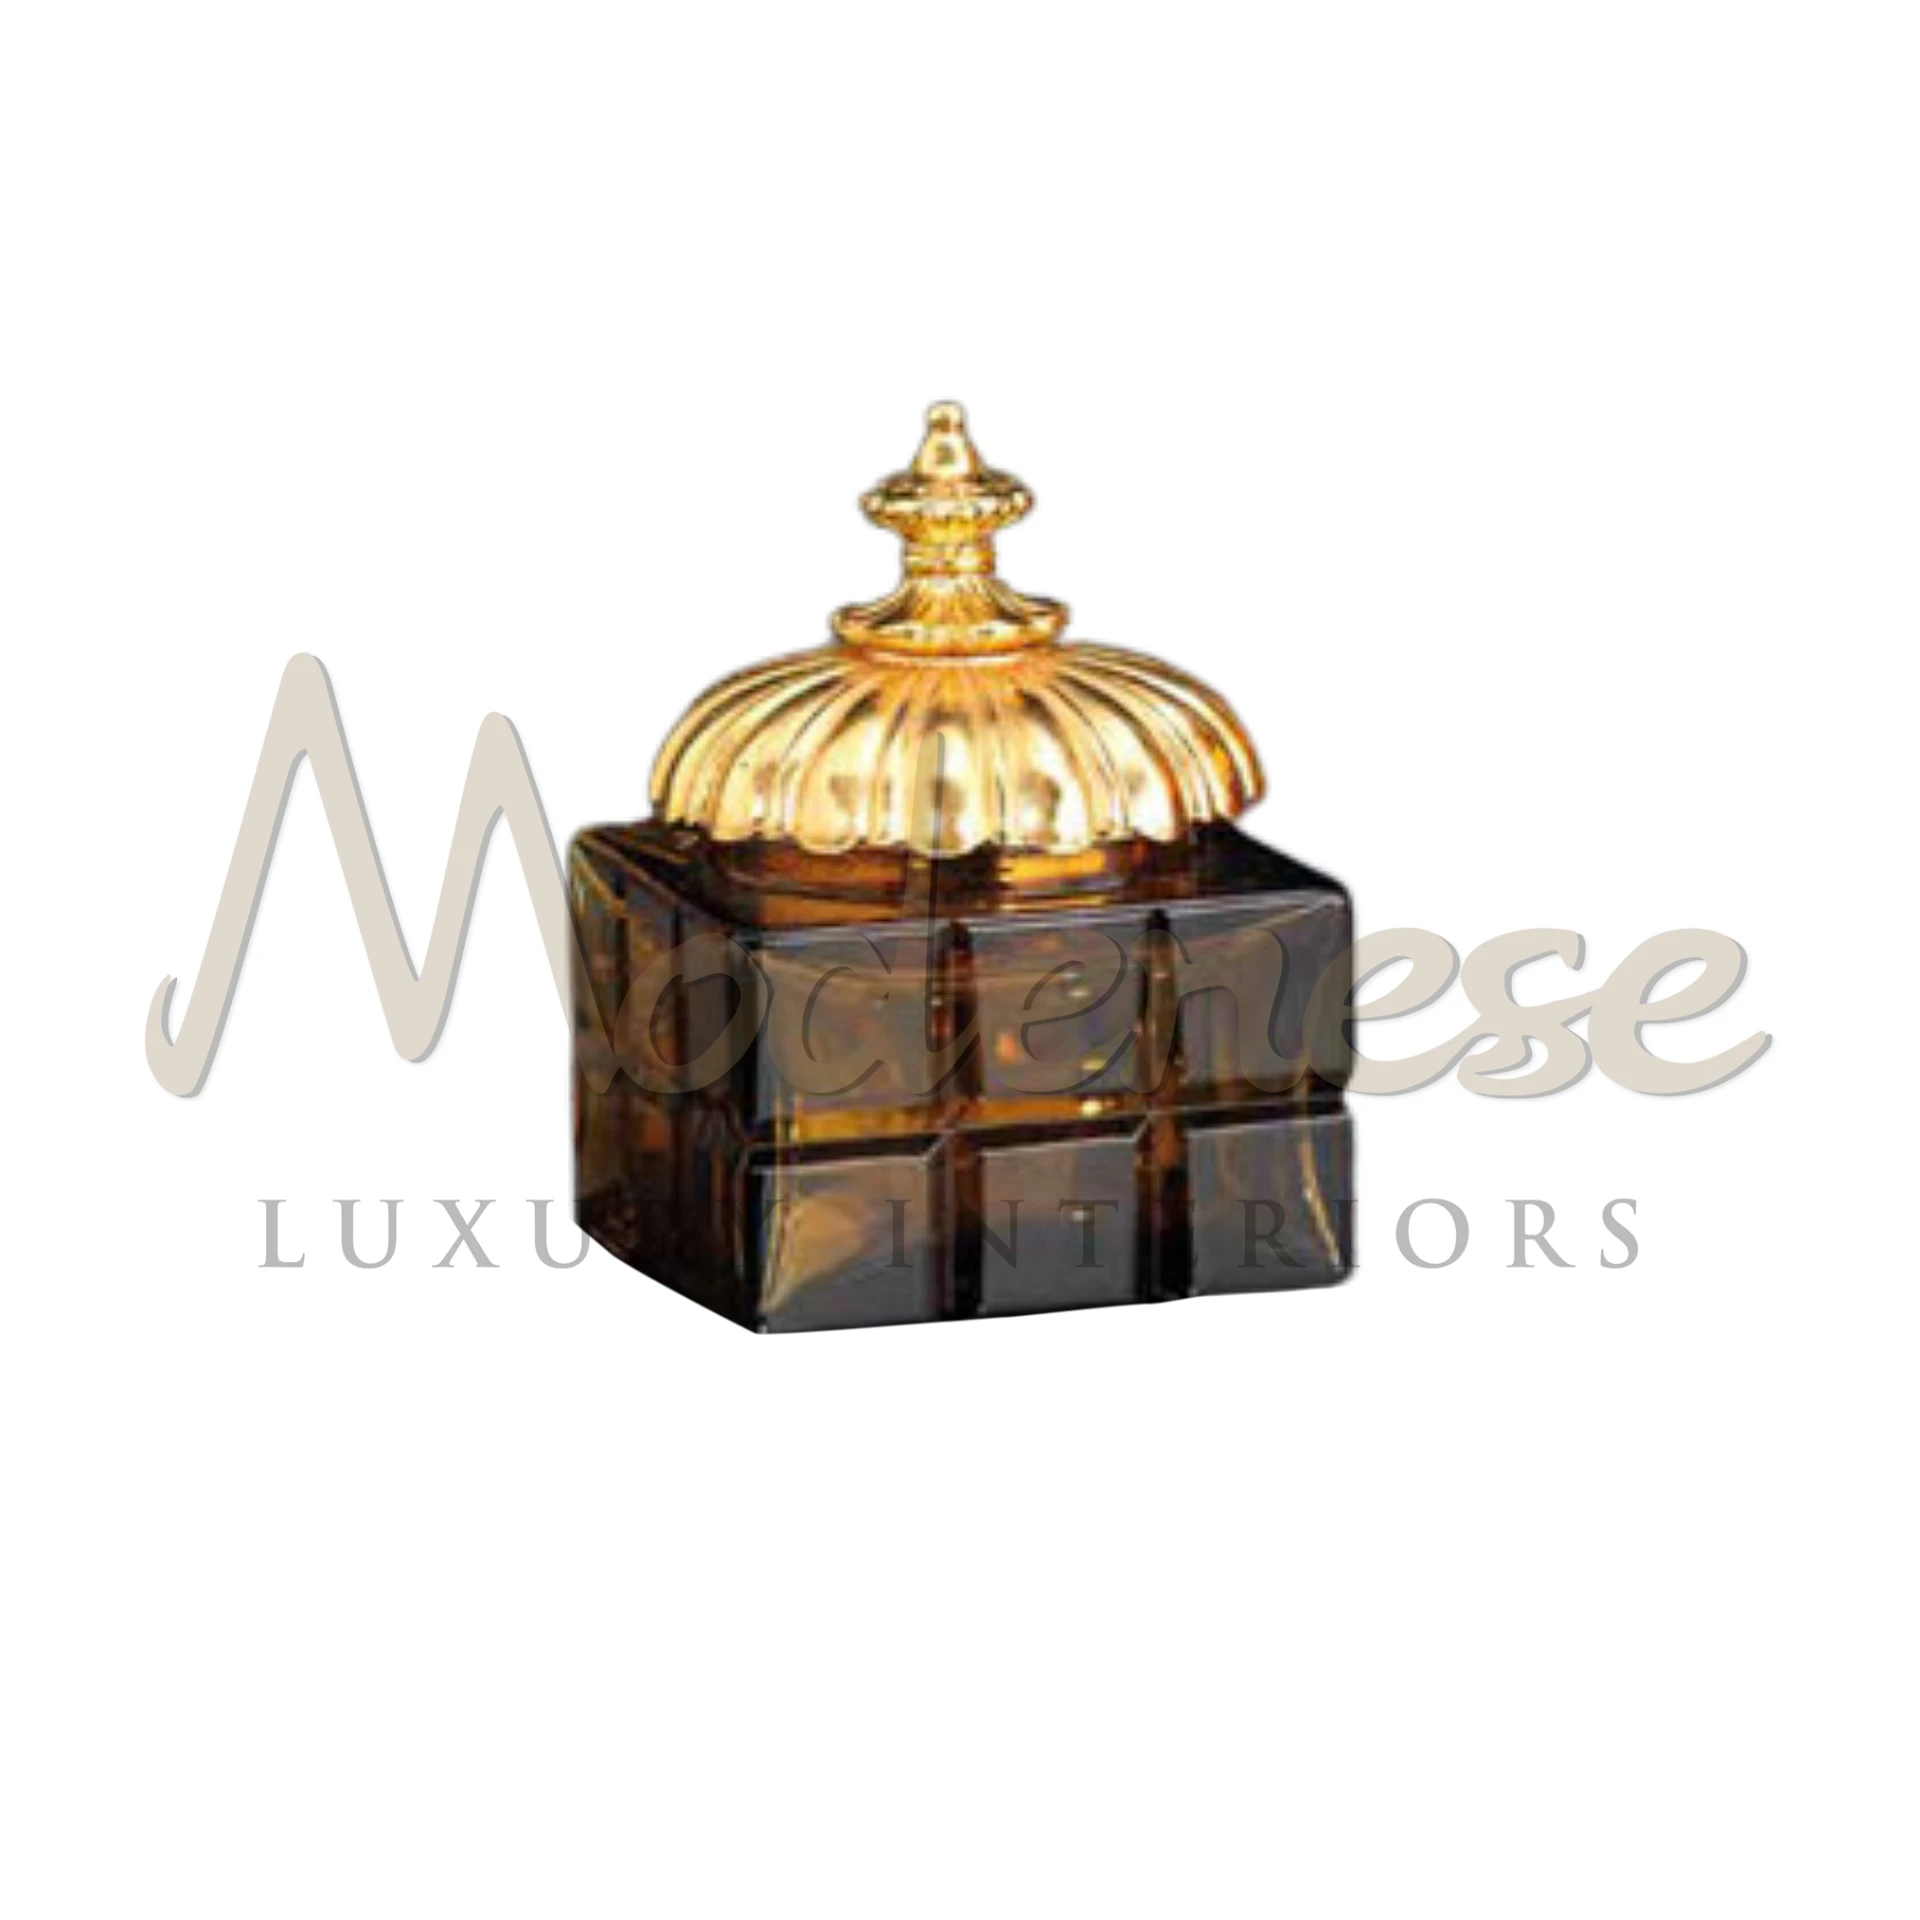 Italian style box with intricate and ornate designs, epitomizing luxury and classic elegance for sophisticated interior design.